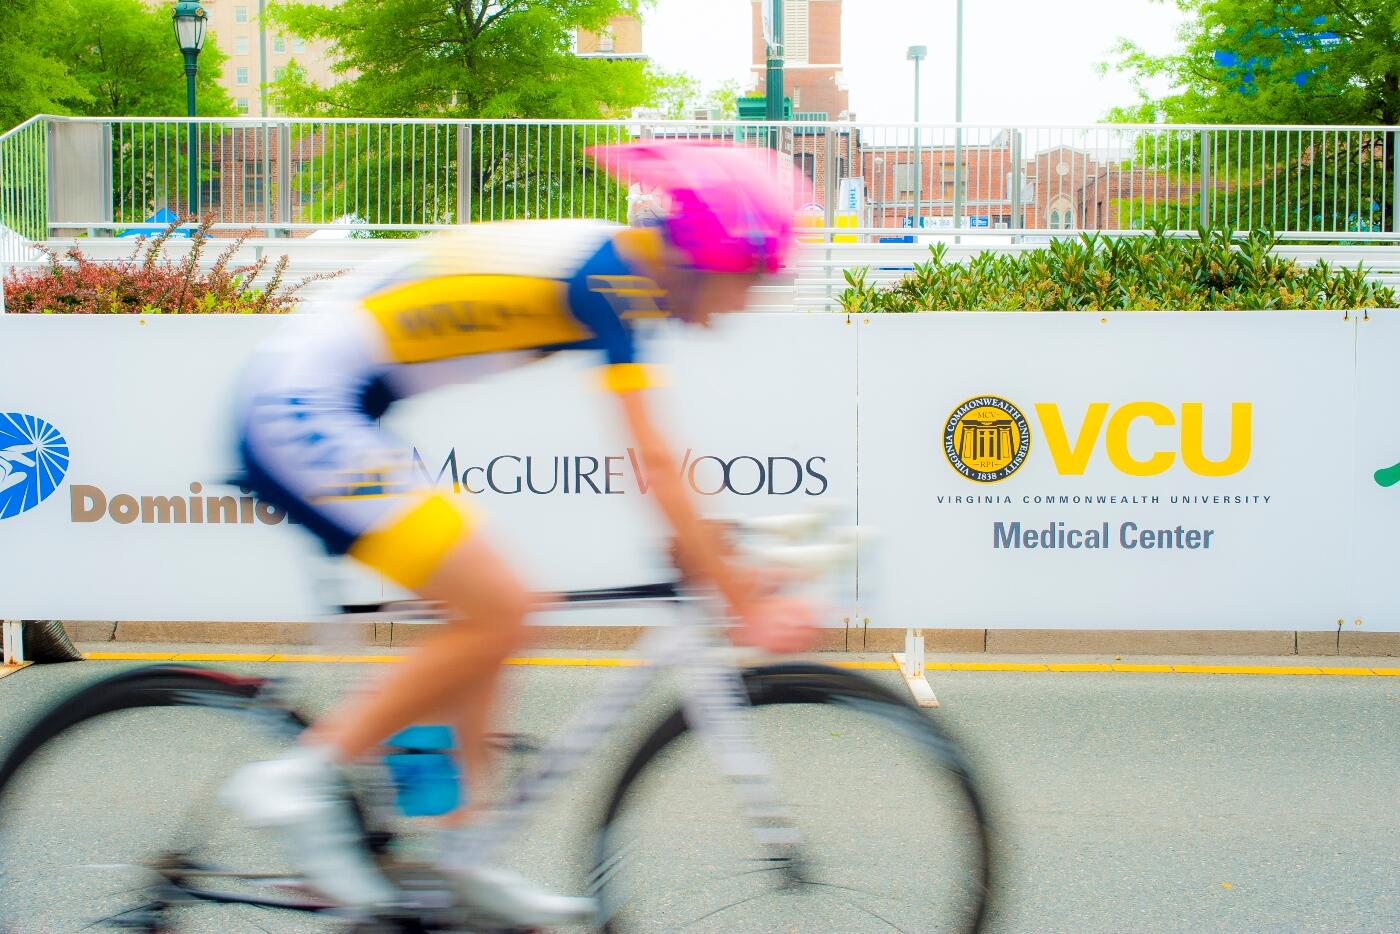 VCU Medical Center was medical sponsor and sole medical provider at the 2014 USA Cycling Collegiate Road National Championships and will hold the same distinction at the 2015 UCI Road World Championships.